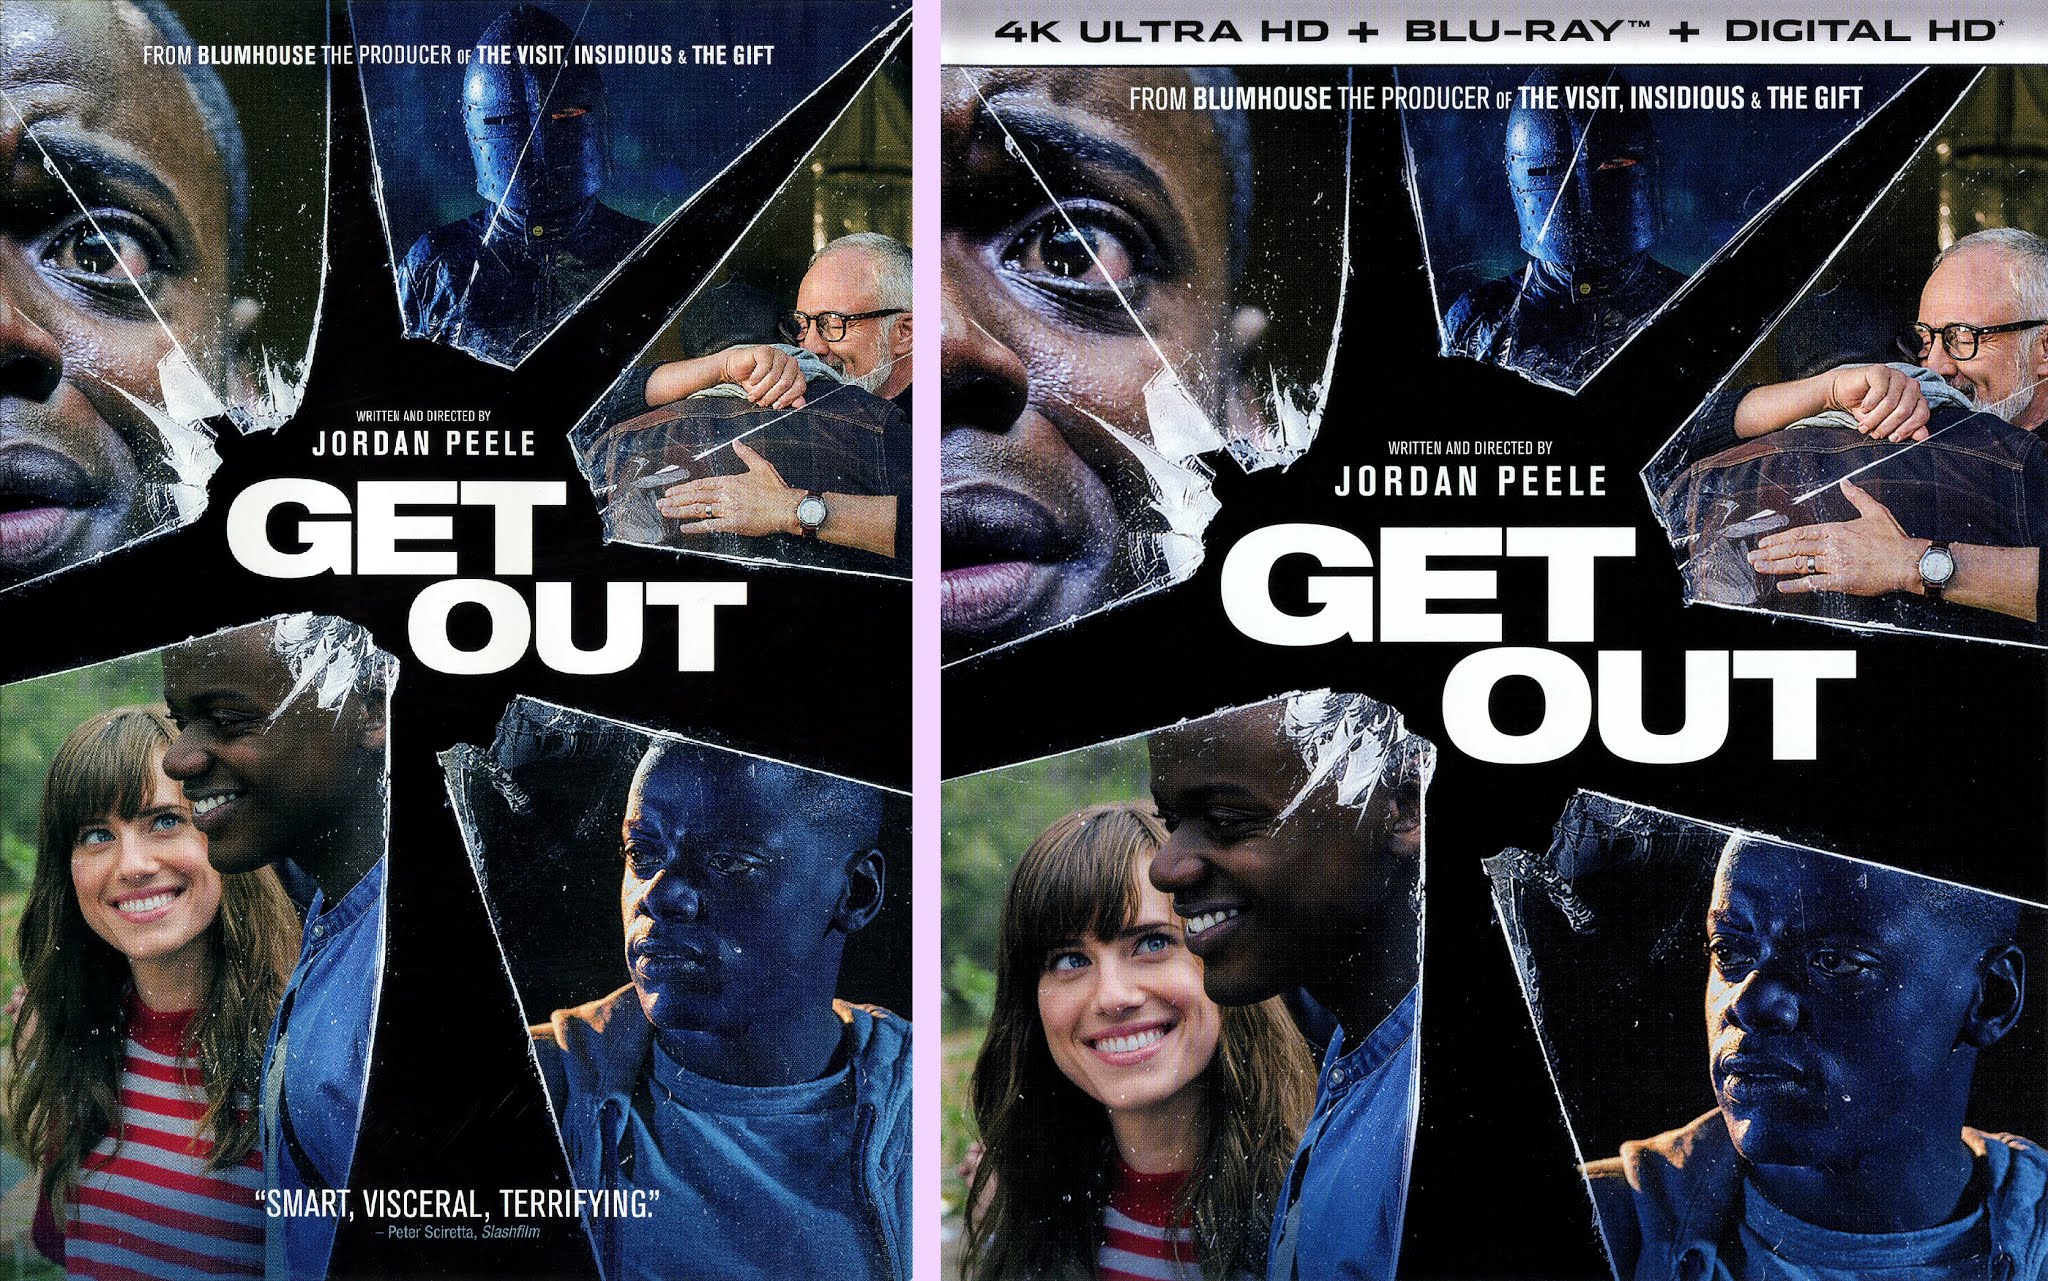 The Meaning of Eyes and Cameras in Jordan Peele's 'Get Out' - The Atlantic